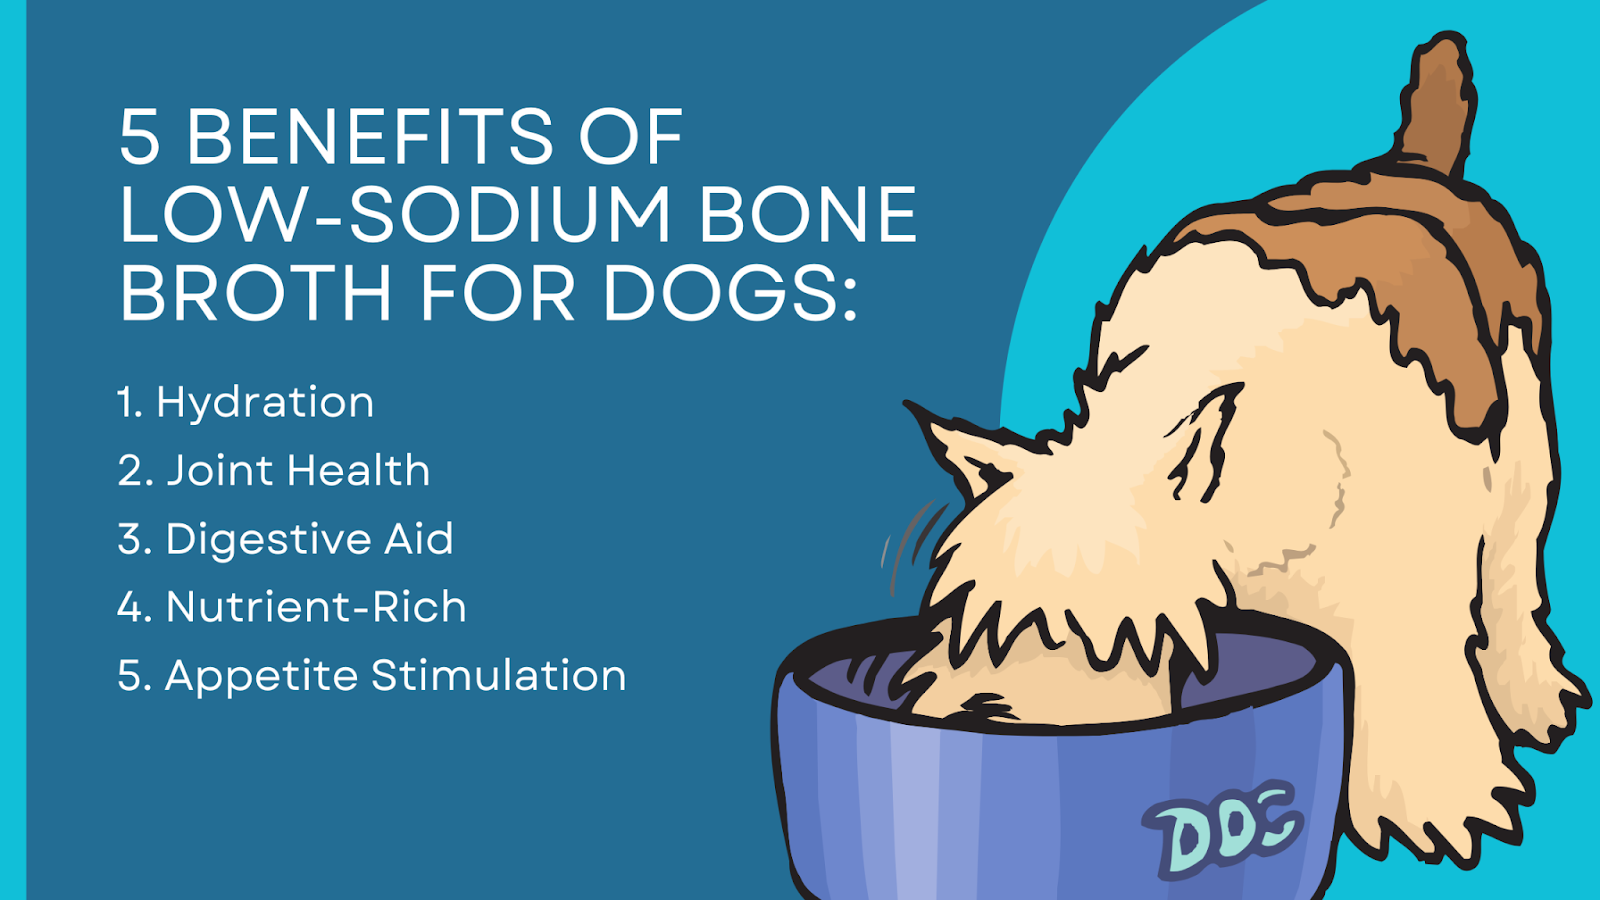 5 benefits of low-sodium bone broth for dogs